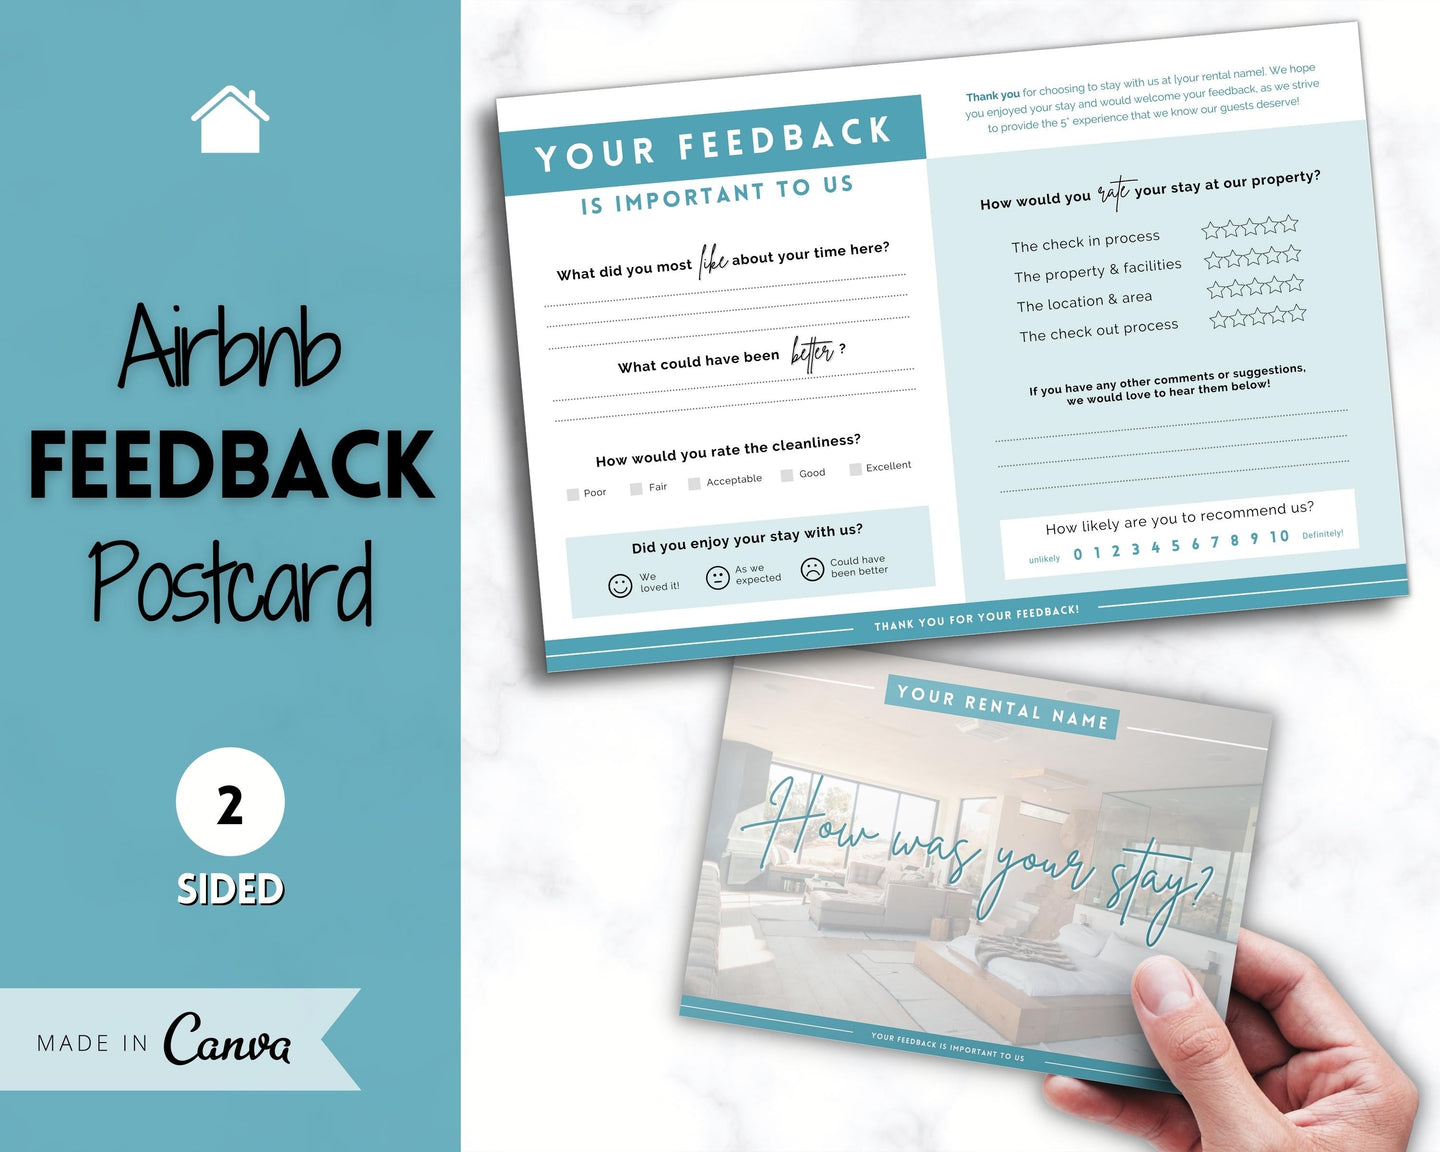 Airbnb Feedback Request Postcard, Editable Airbnb Guest Rating & Review Form, Air bnb Welcome Book, Check Out Signs, VRBO Signage, STR Host - Blue